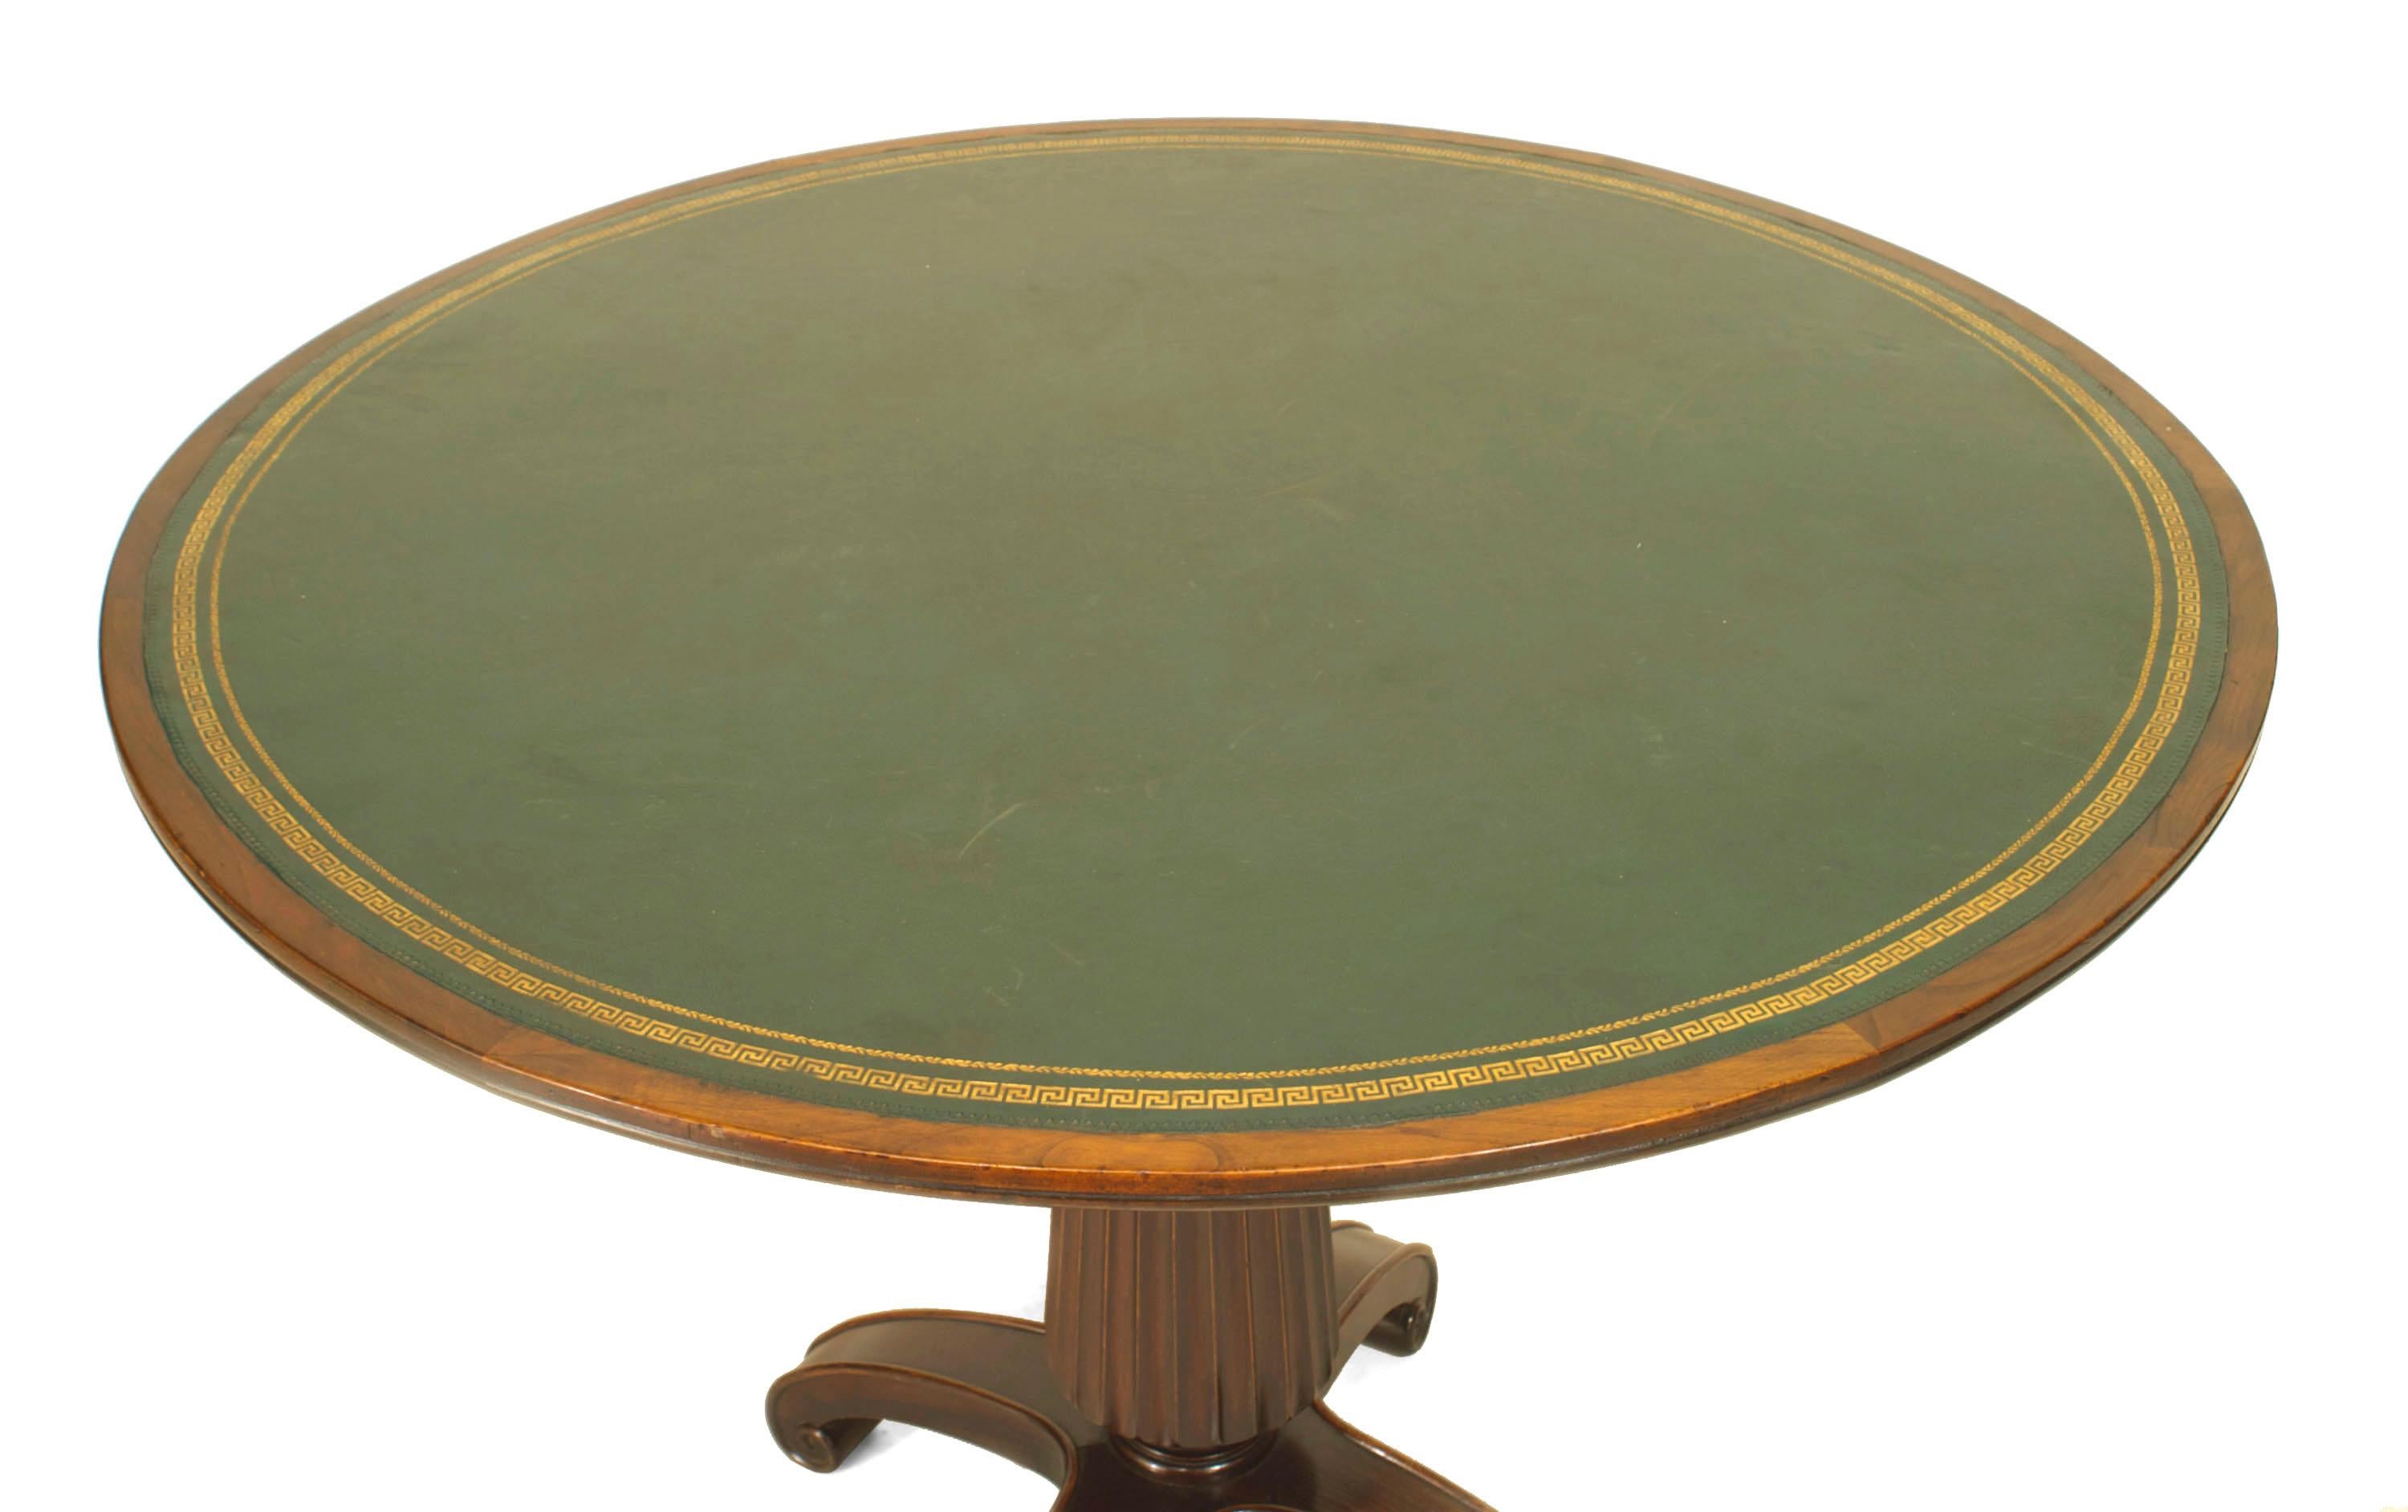 Twentieth century English Georgian style mahogany game table with a fluted tripod pedestal base supporting a round top inset with green leather.